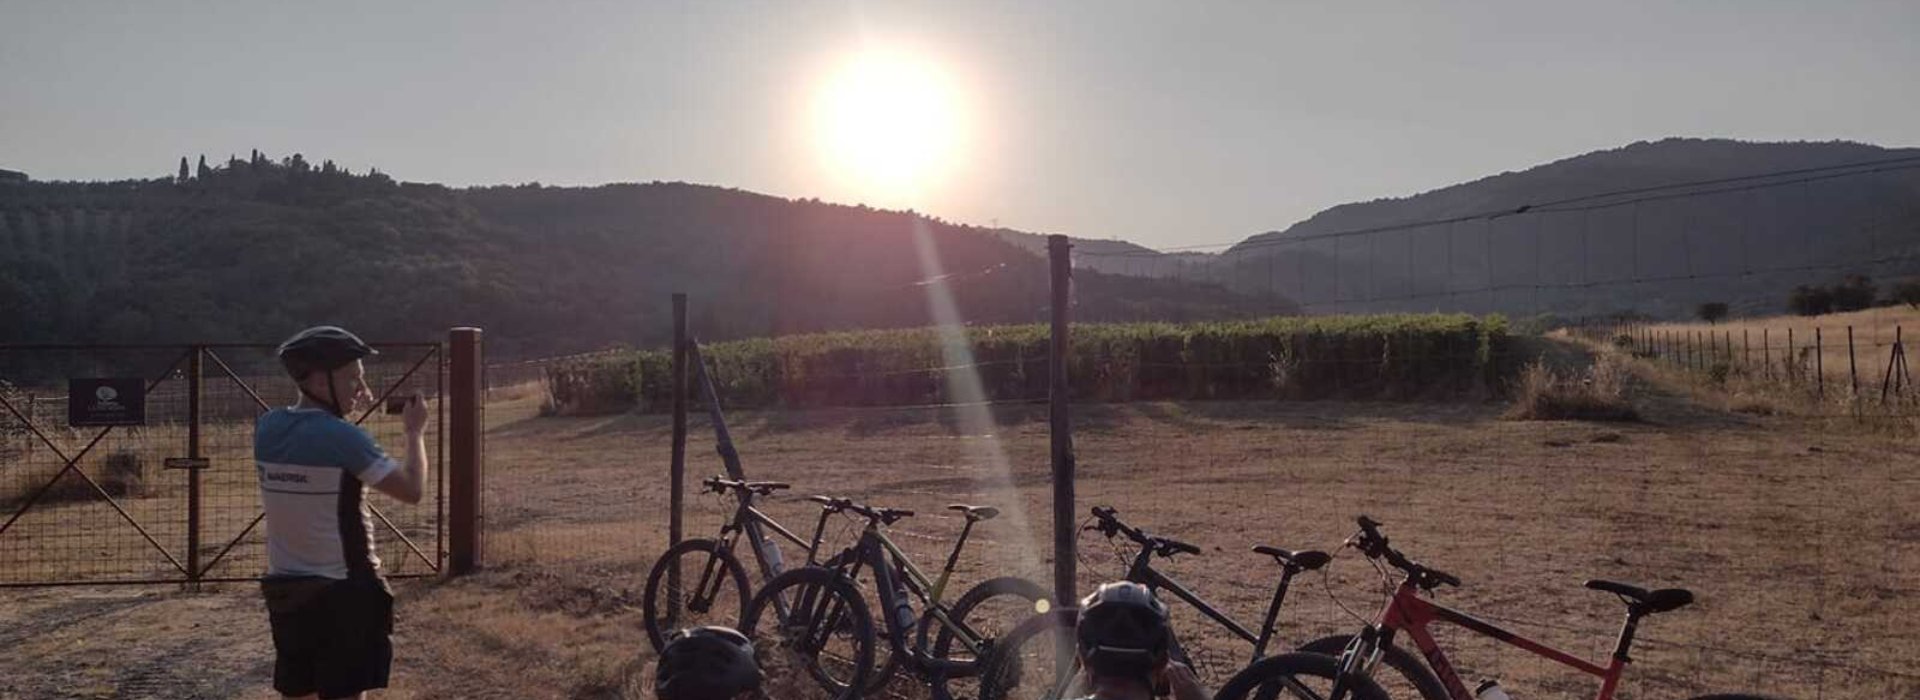 E-bike tour with tasting in the Chianti hills, near Florence